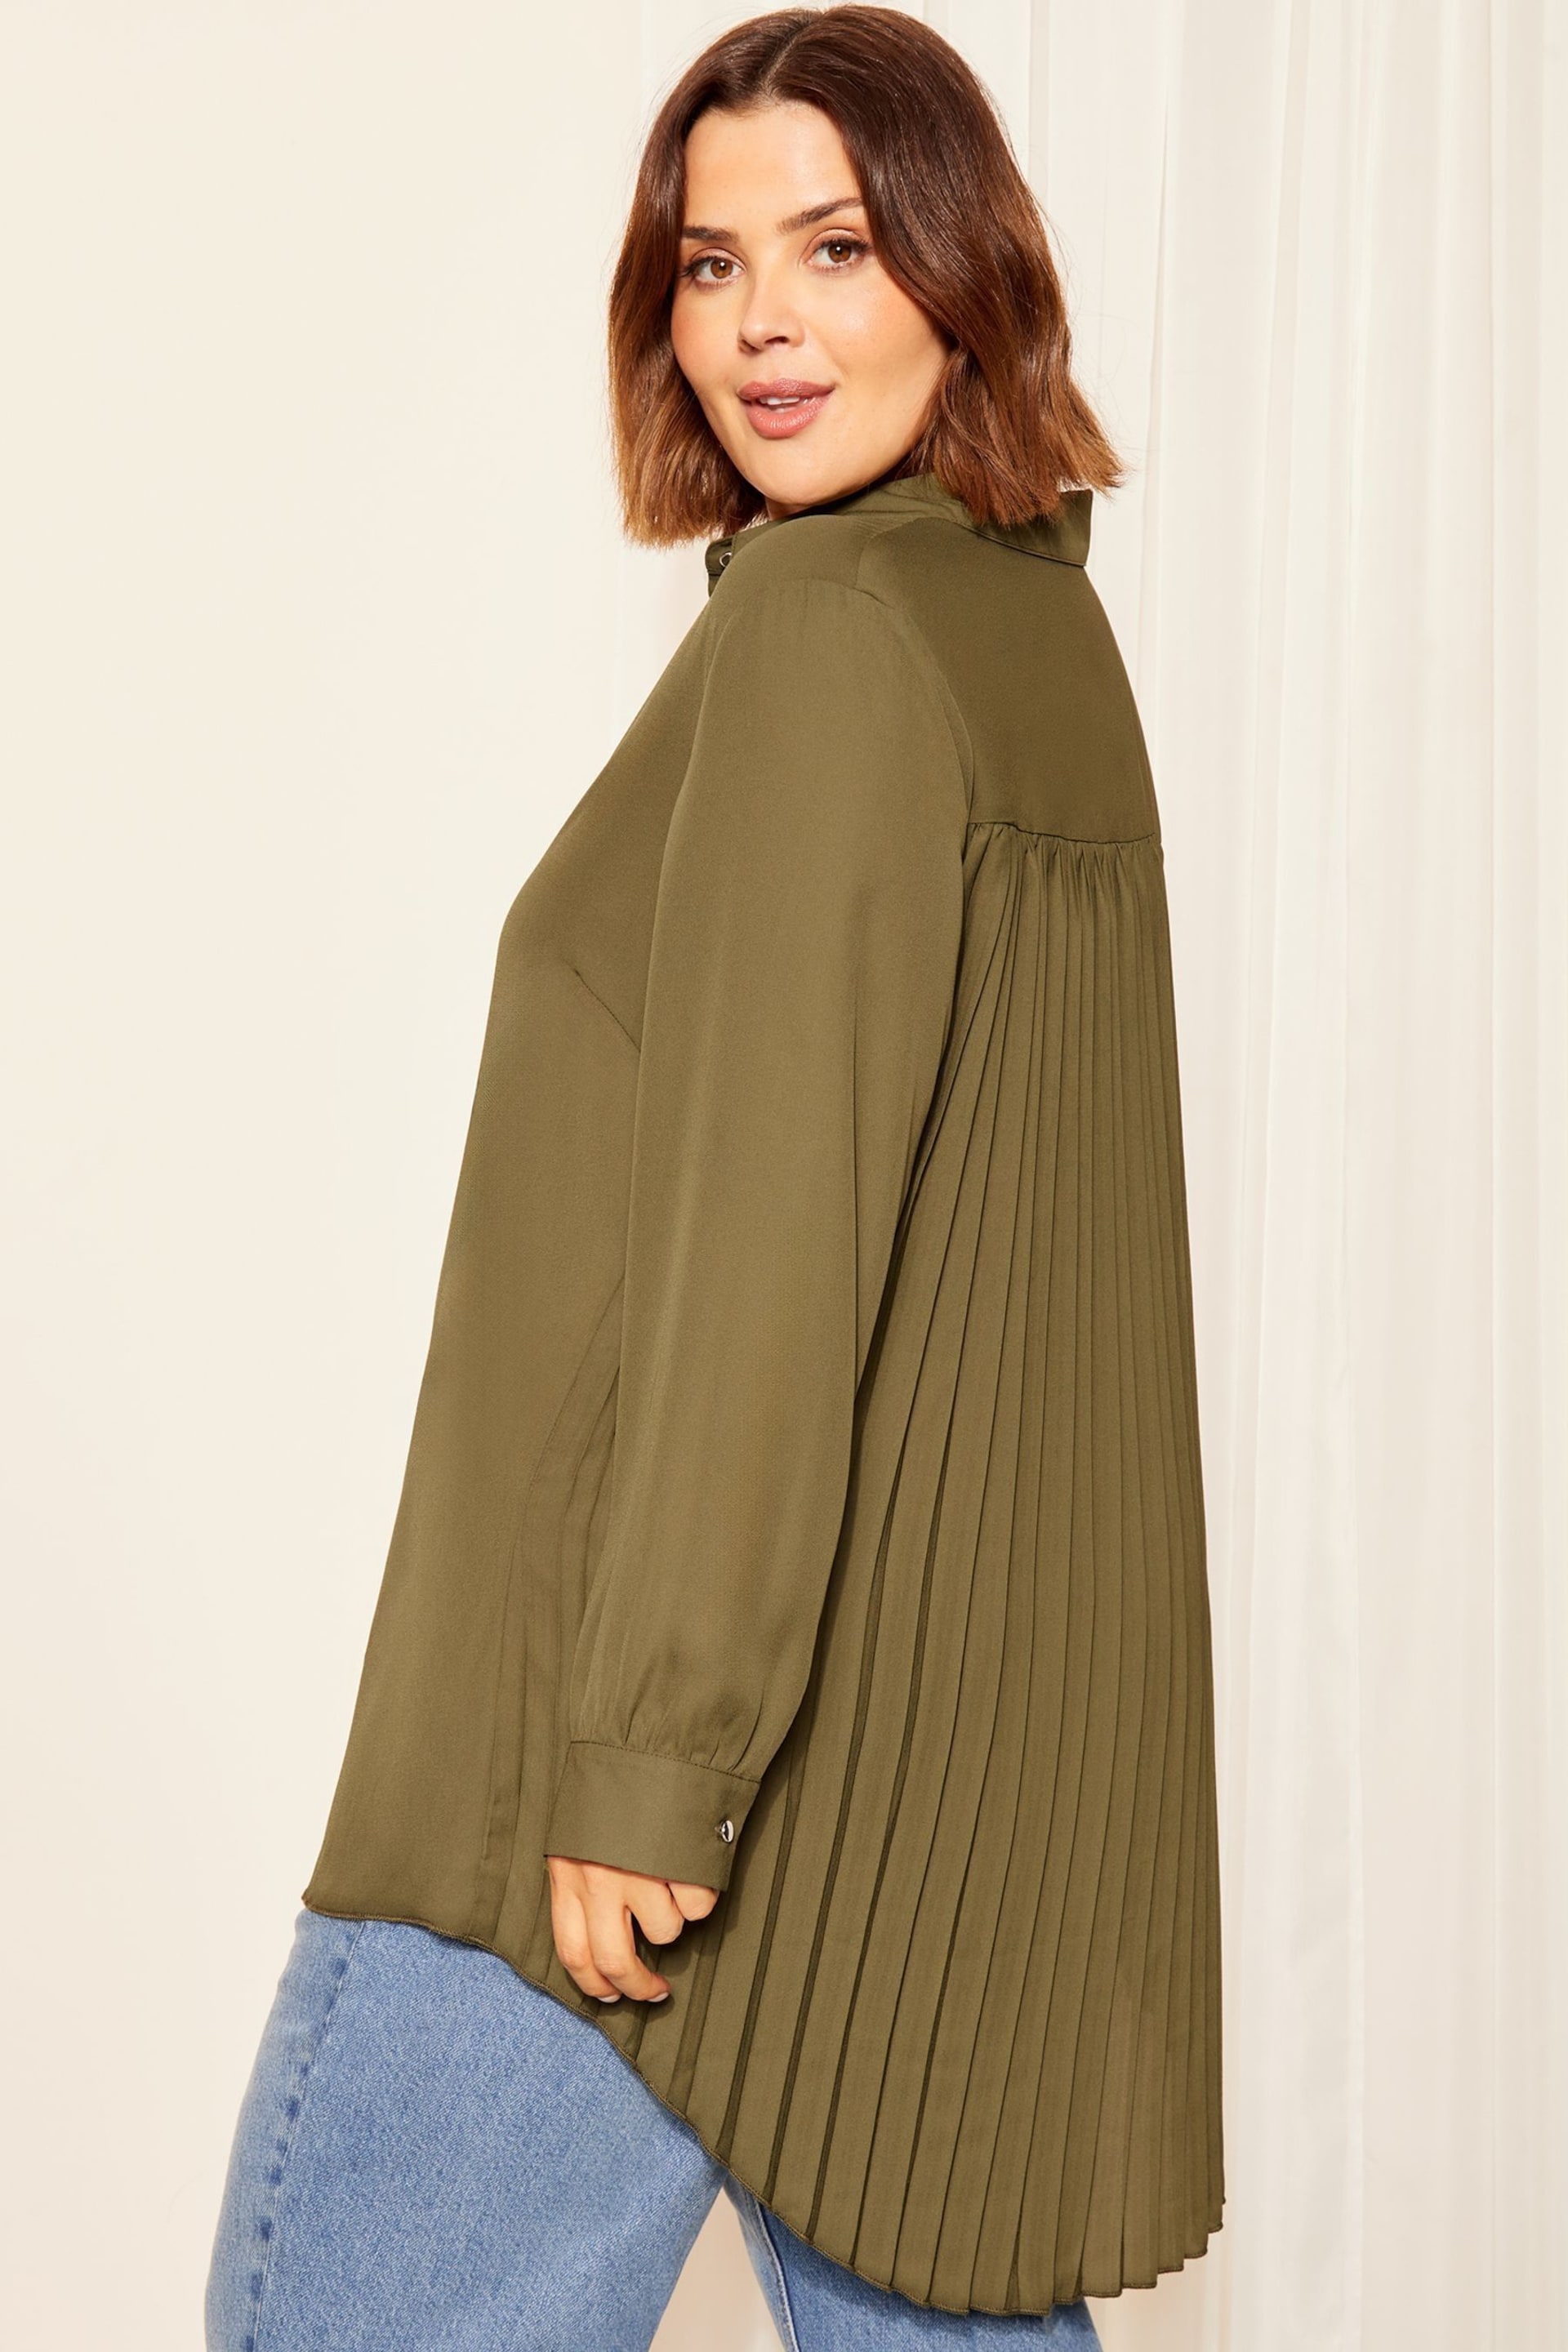 Curves Like These Khaki Green Pleated Back Button Through Shirt - Image 1 of 4